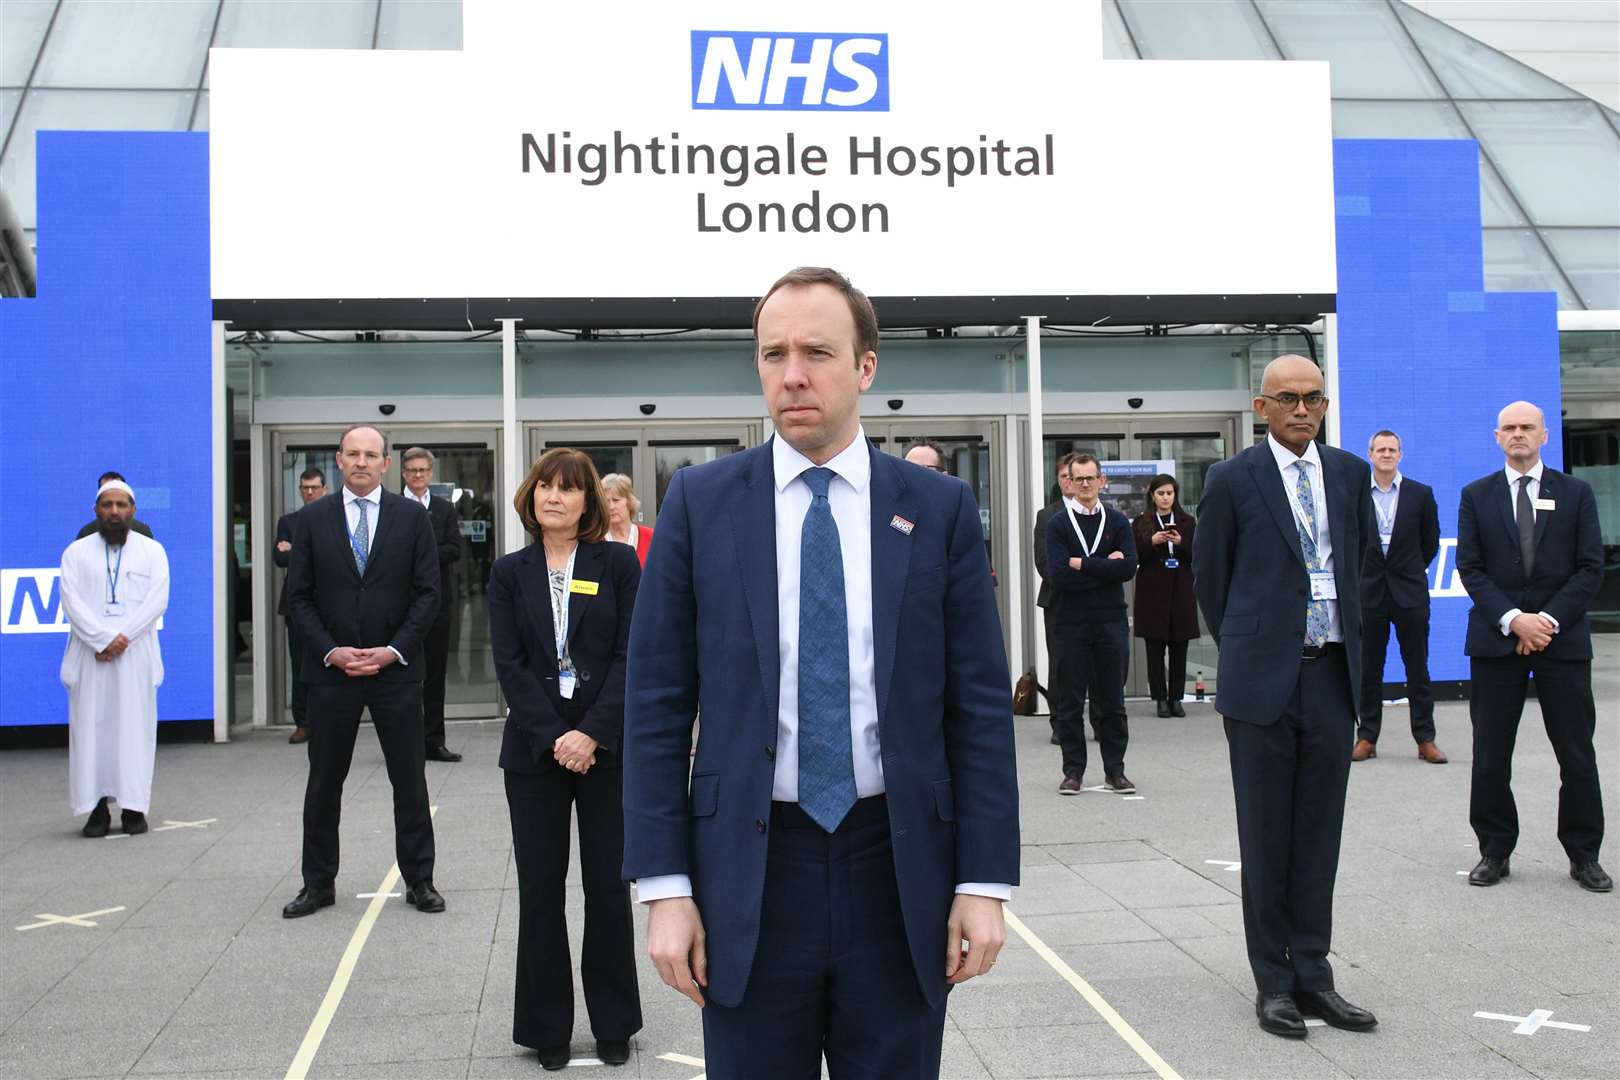 Health Secretary Matt Hancock at the opening of the NHS Nightingale Hospital at the ExCel centre in London (Stefan Rousseau/PA)